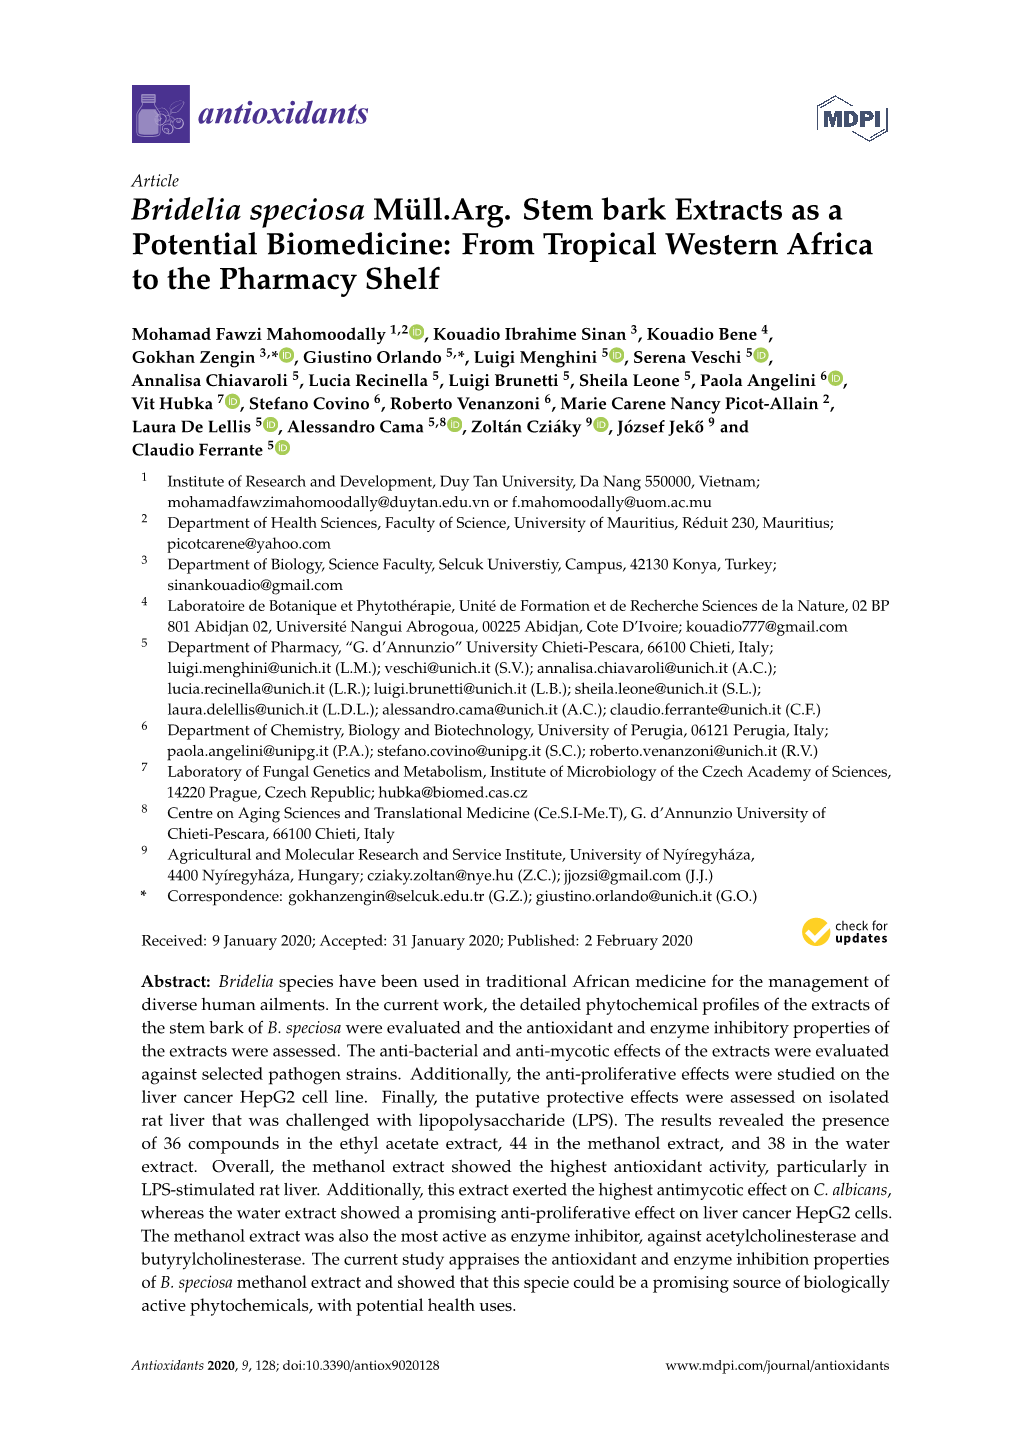 Bridelia Speciosa Müll. Arg. Stem Bark Extracts As a Potential Biomedicine: from Tropical Western Africa to the Pharmacy Shelf